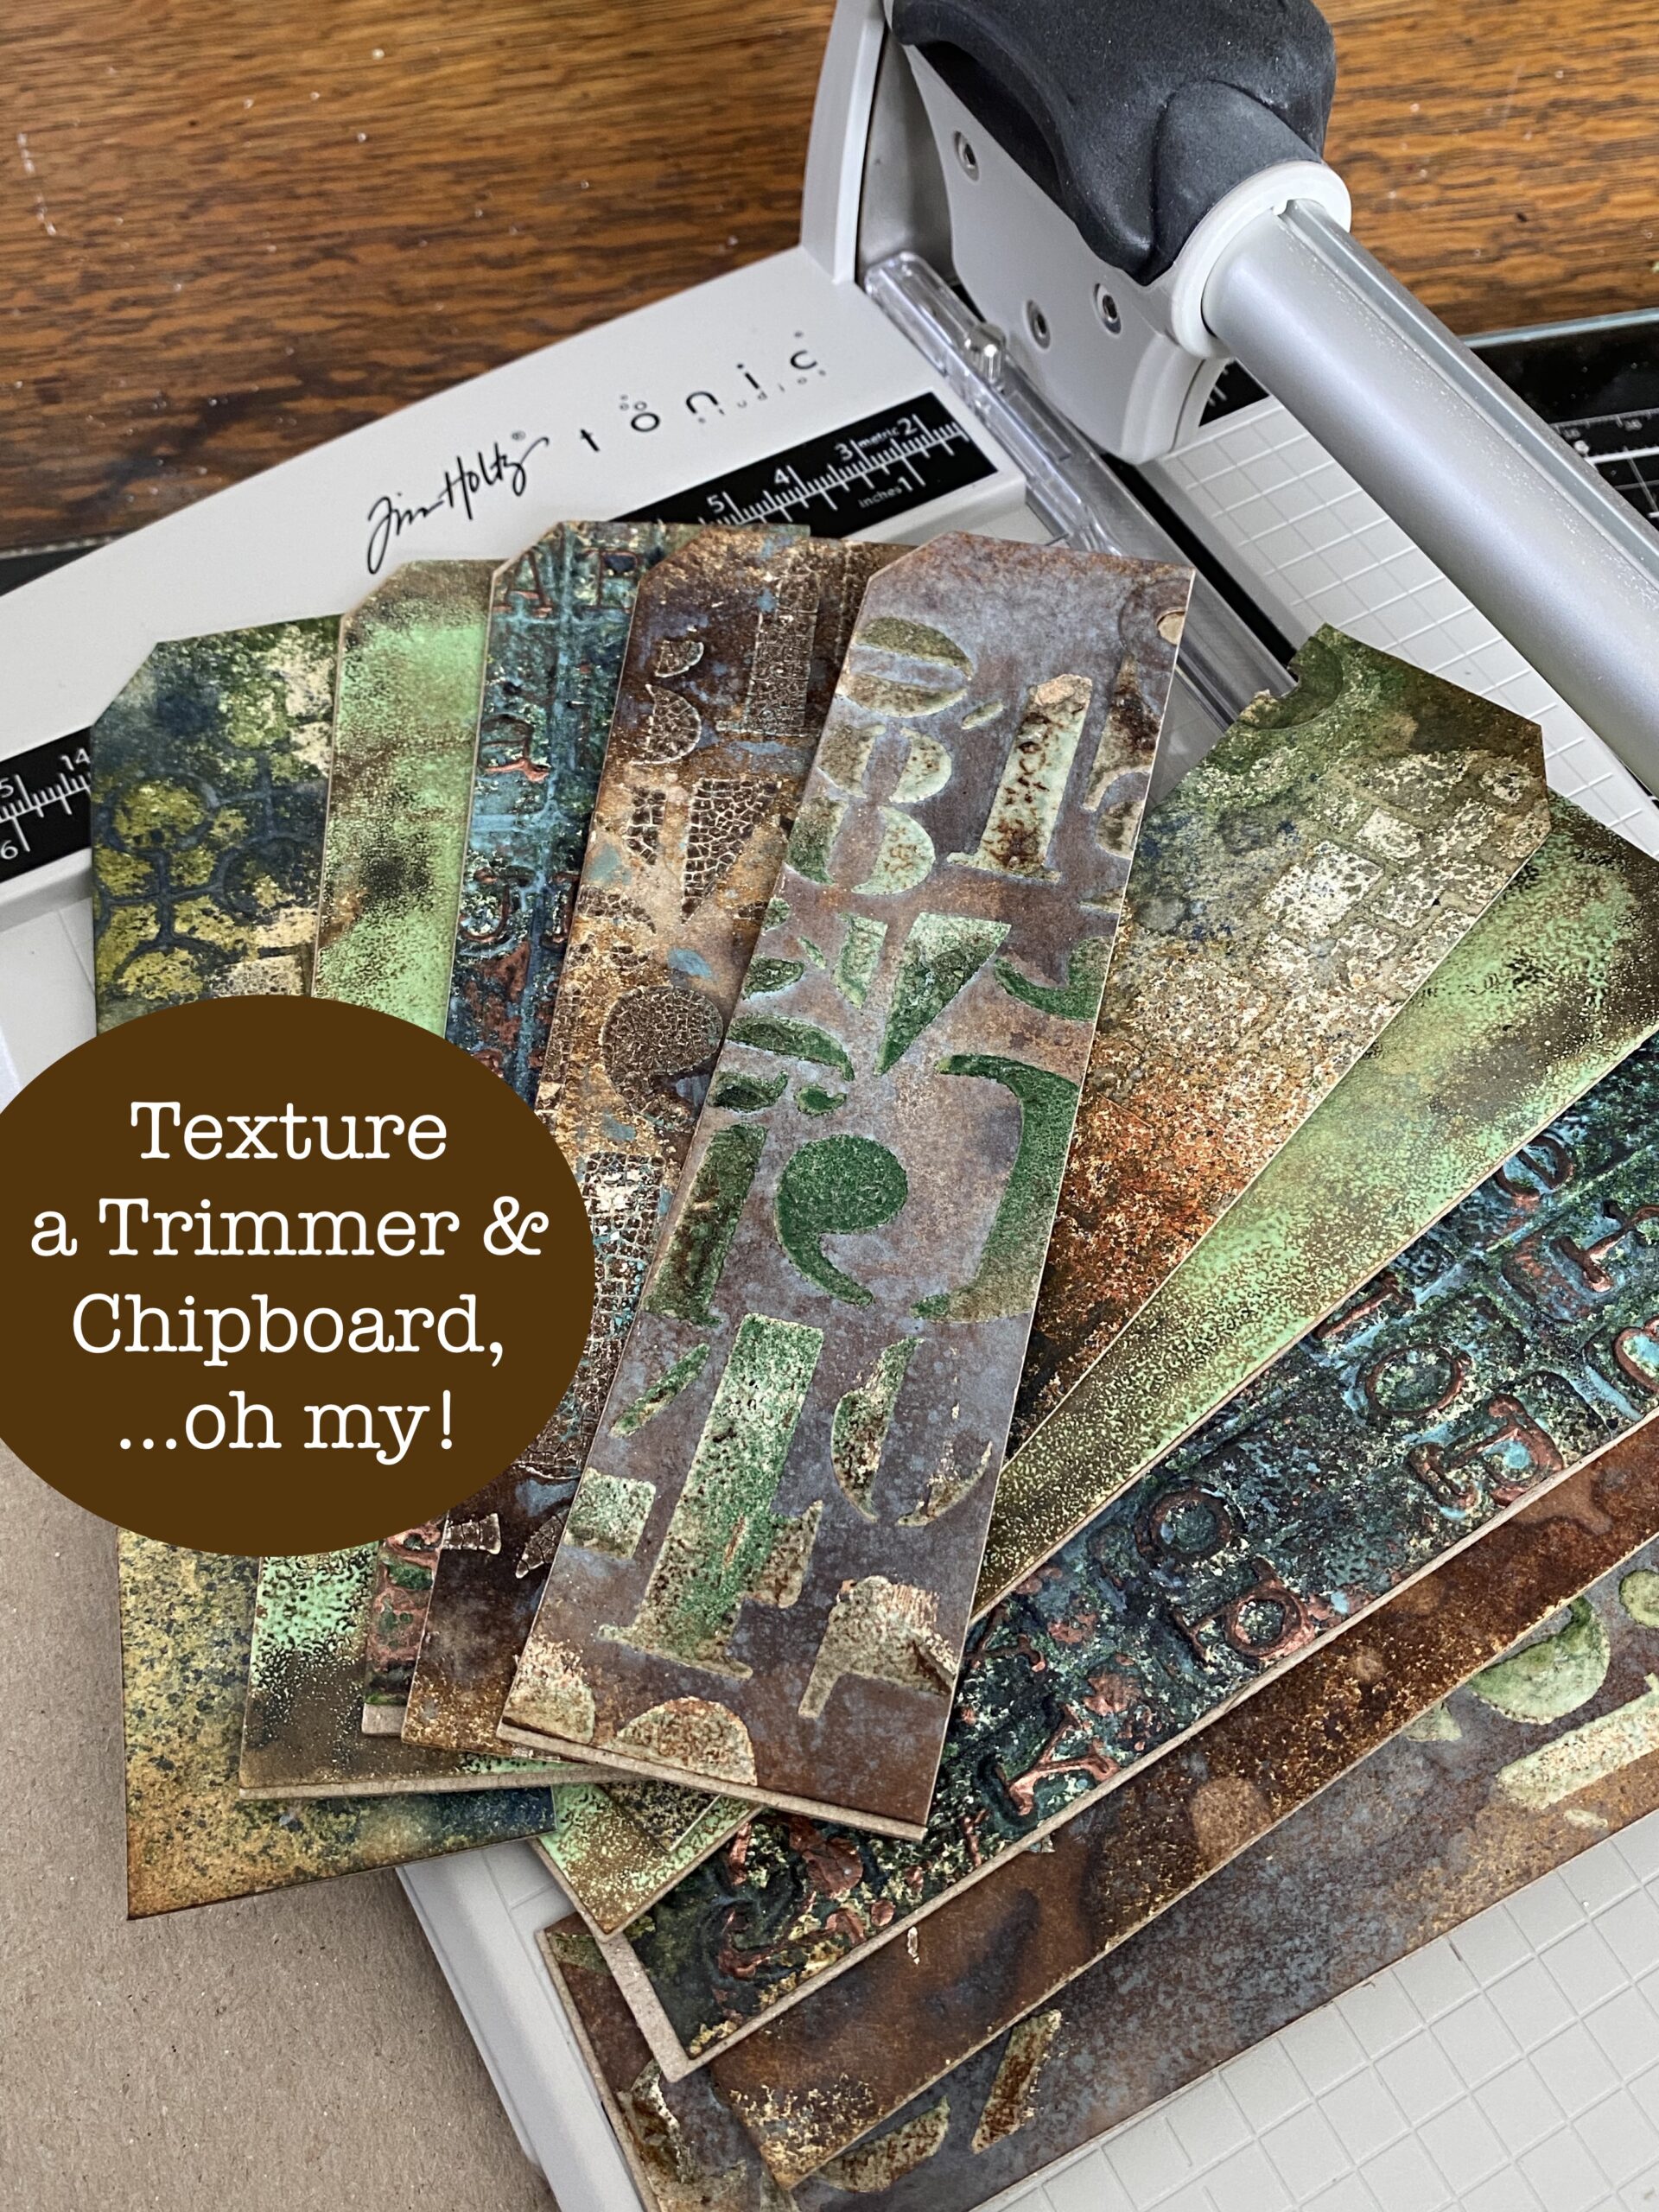 Texture, a Trimmer & Chipboard…Oh my!